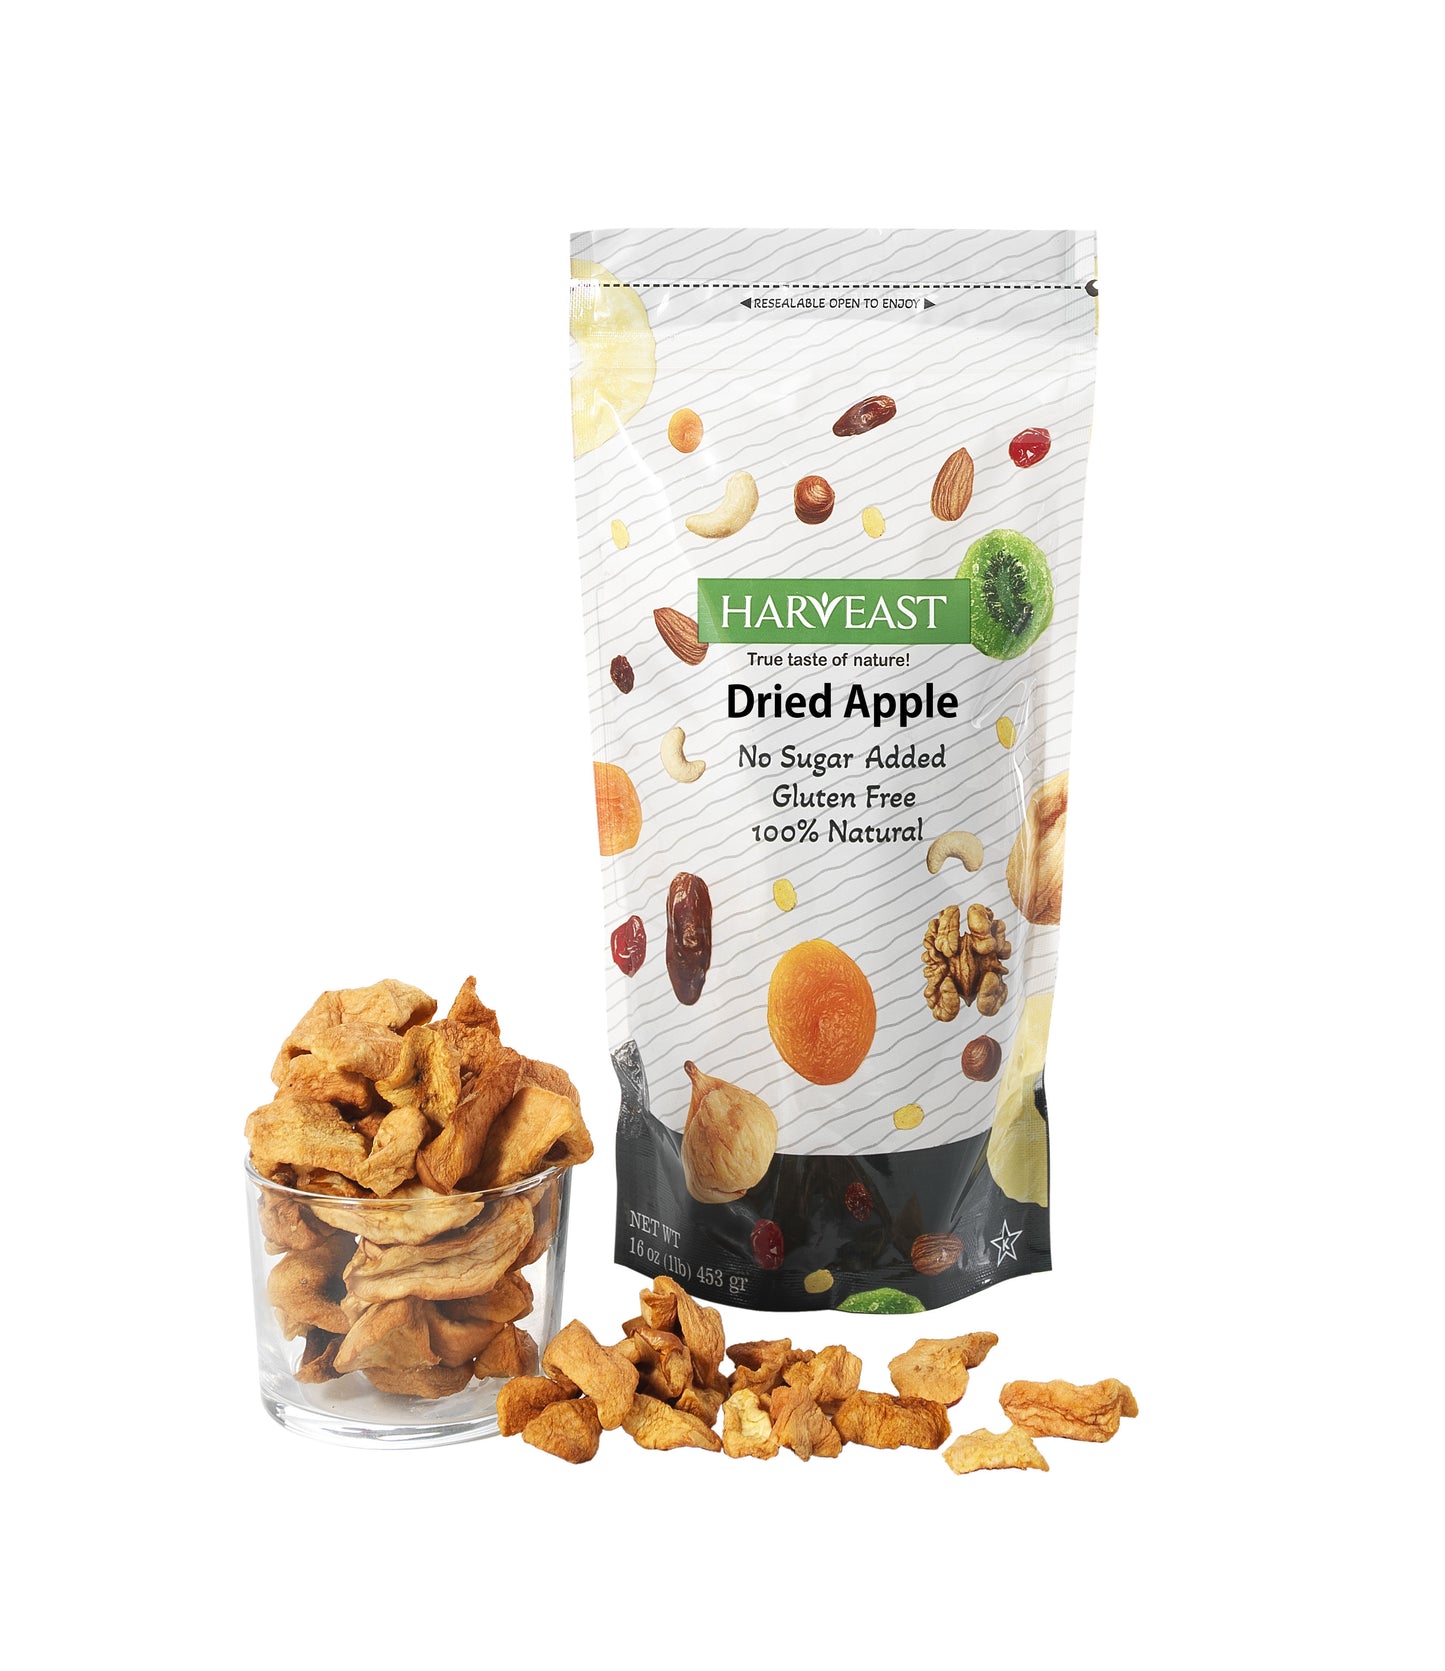 HARVEAST Dried Apple Slices | Unsulfured Gourmet Dehydrated Apples, No Sugar, Gluten Free, Kosher, Vegan, Non-GMO | Dried Sliced Apple Fruit in Resealable Bag, Delicious Healthy Snack 8.81 Oz 1 Pack